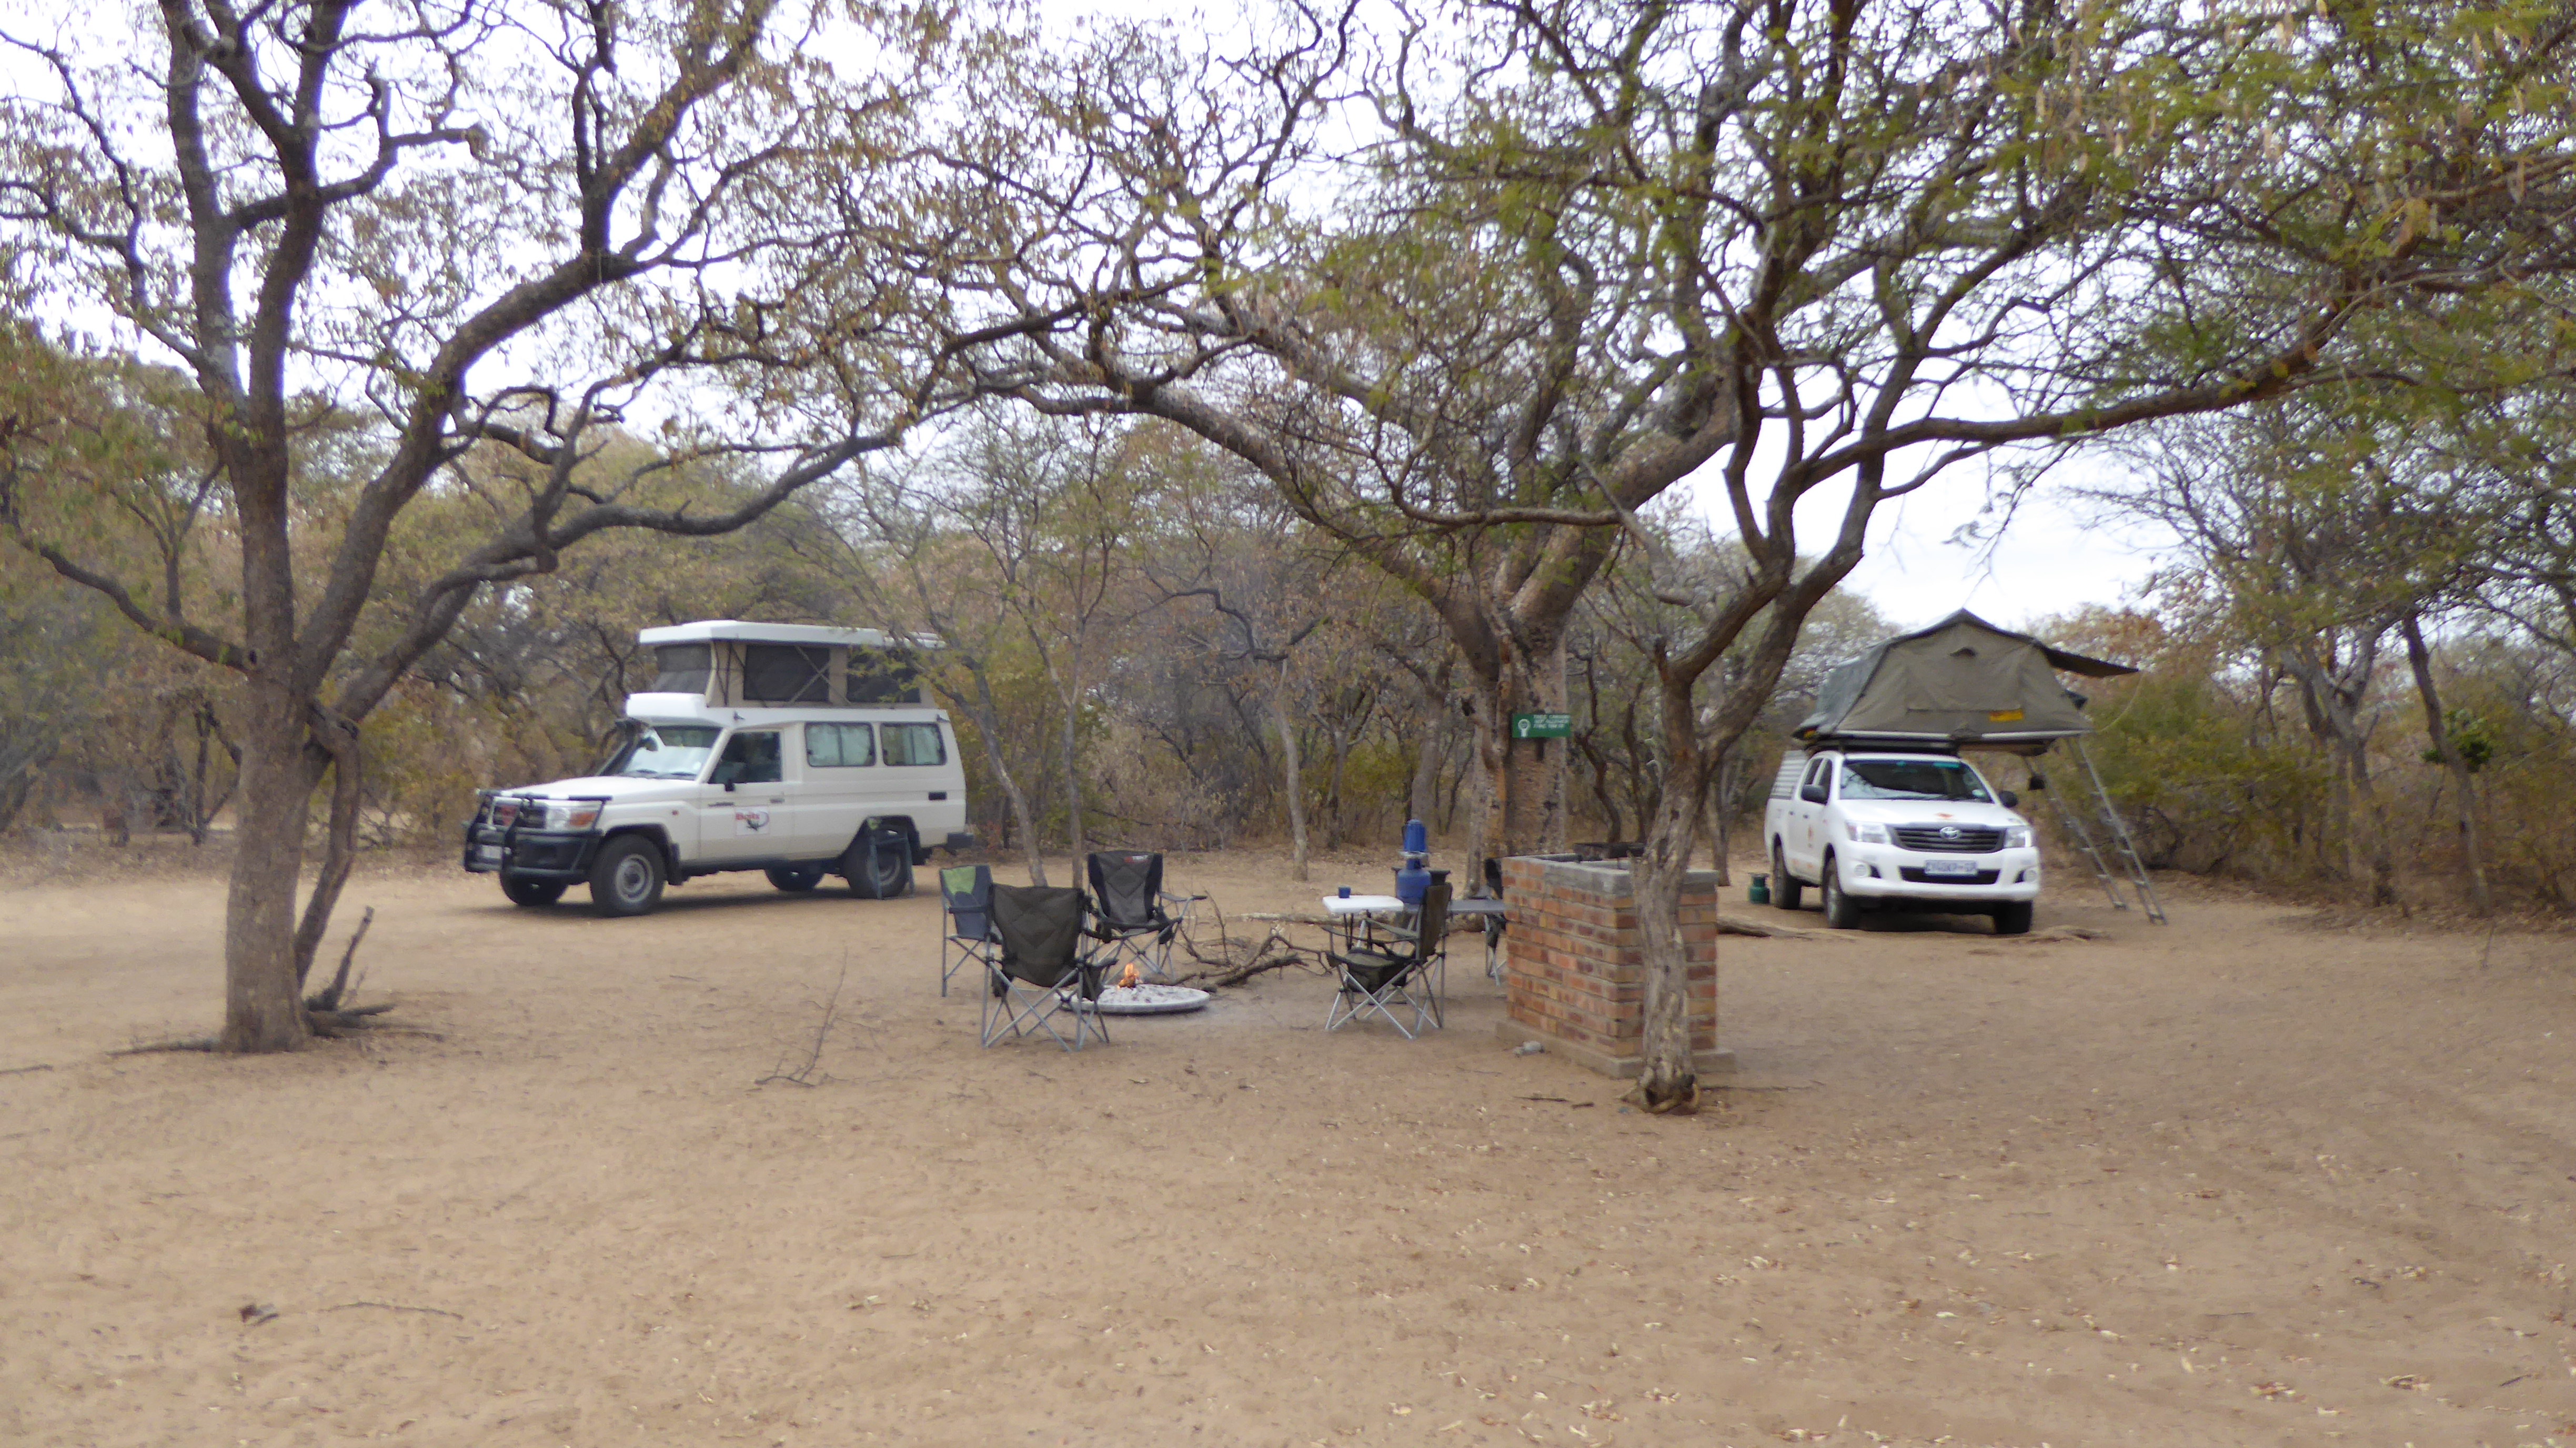 Camp at Khama Rhino Sanctuary with Christian, Konstantin, Till and Tim